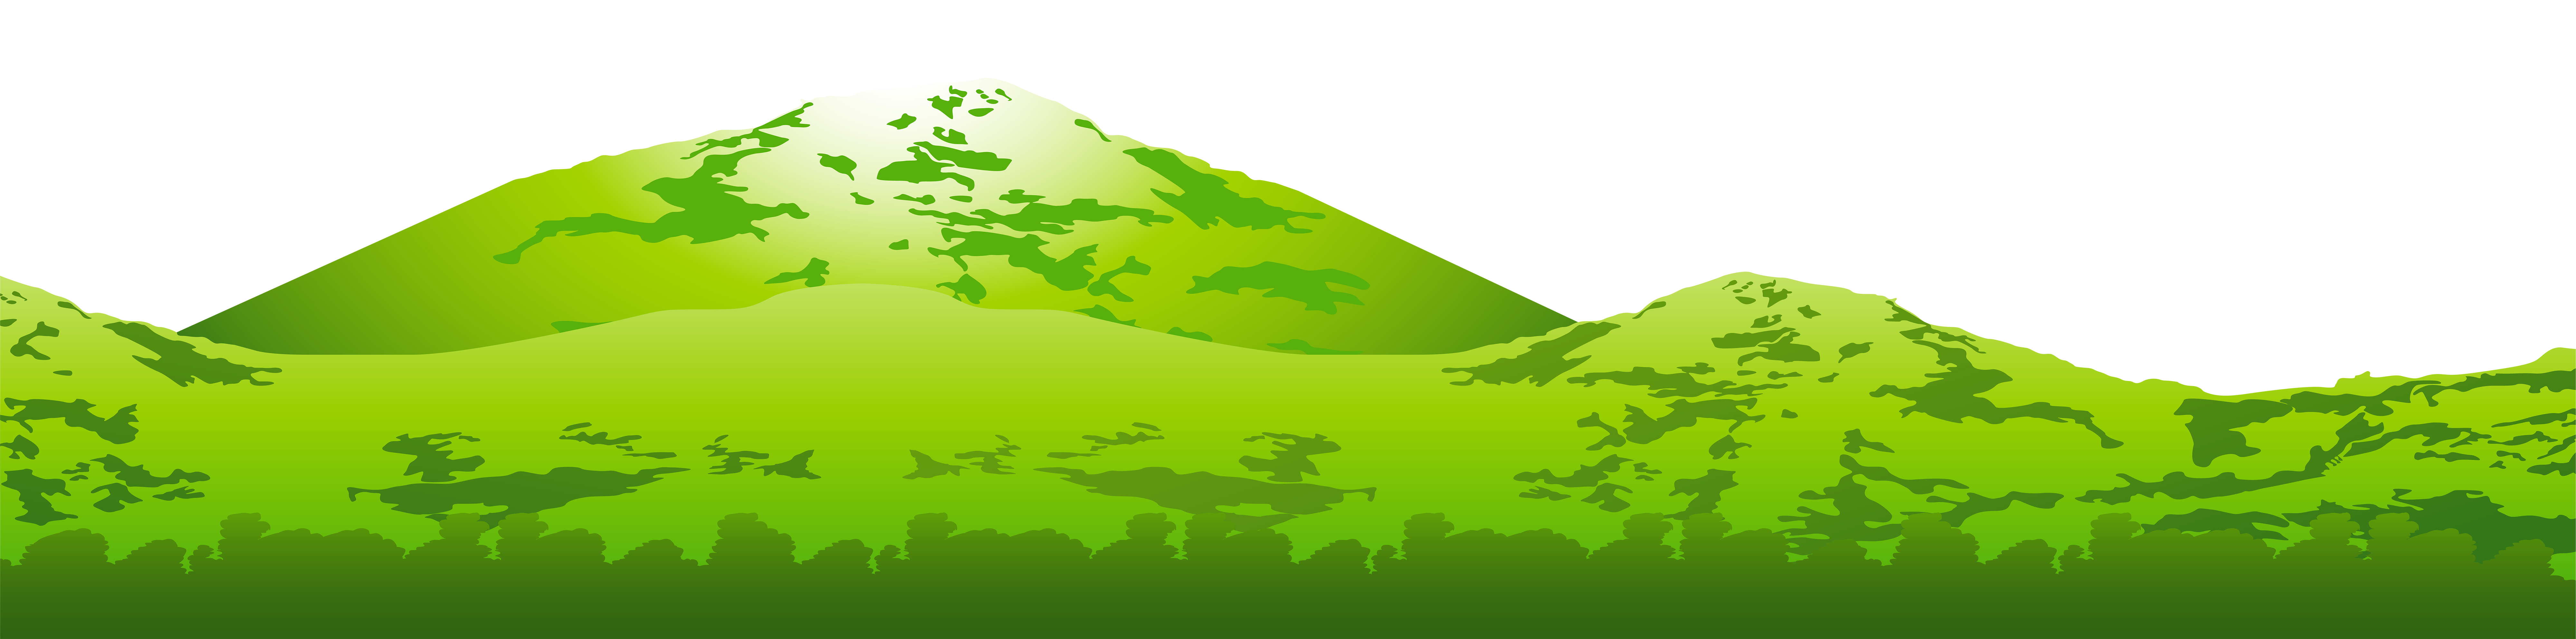 Nature clipart mountain.